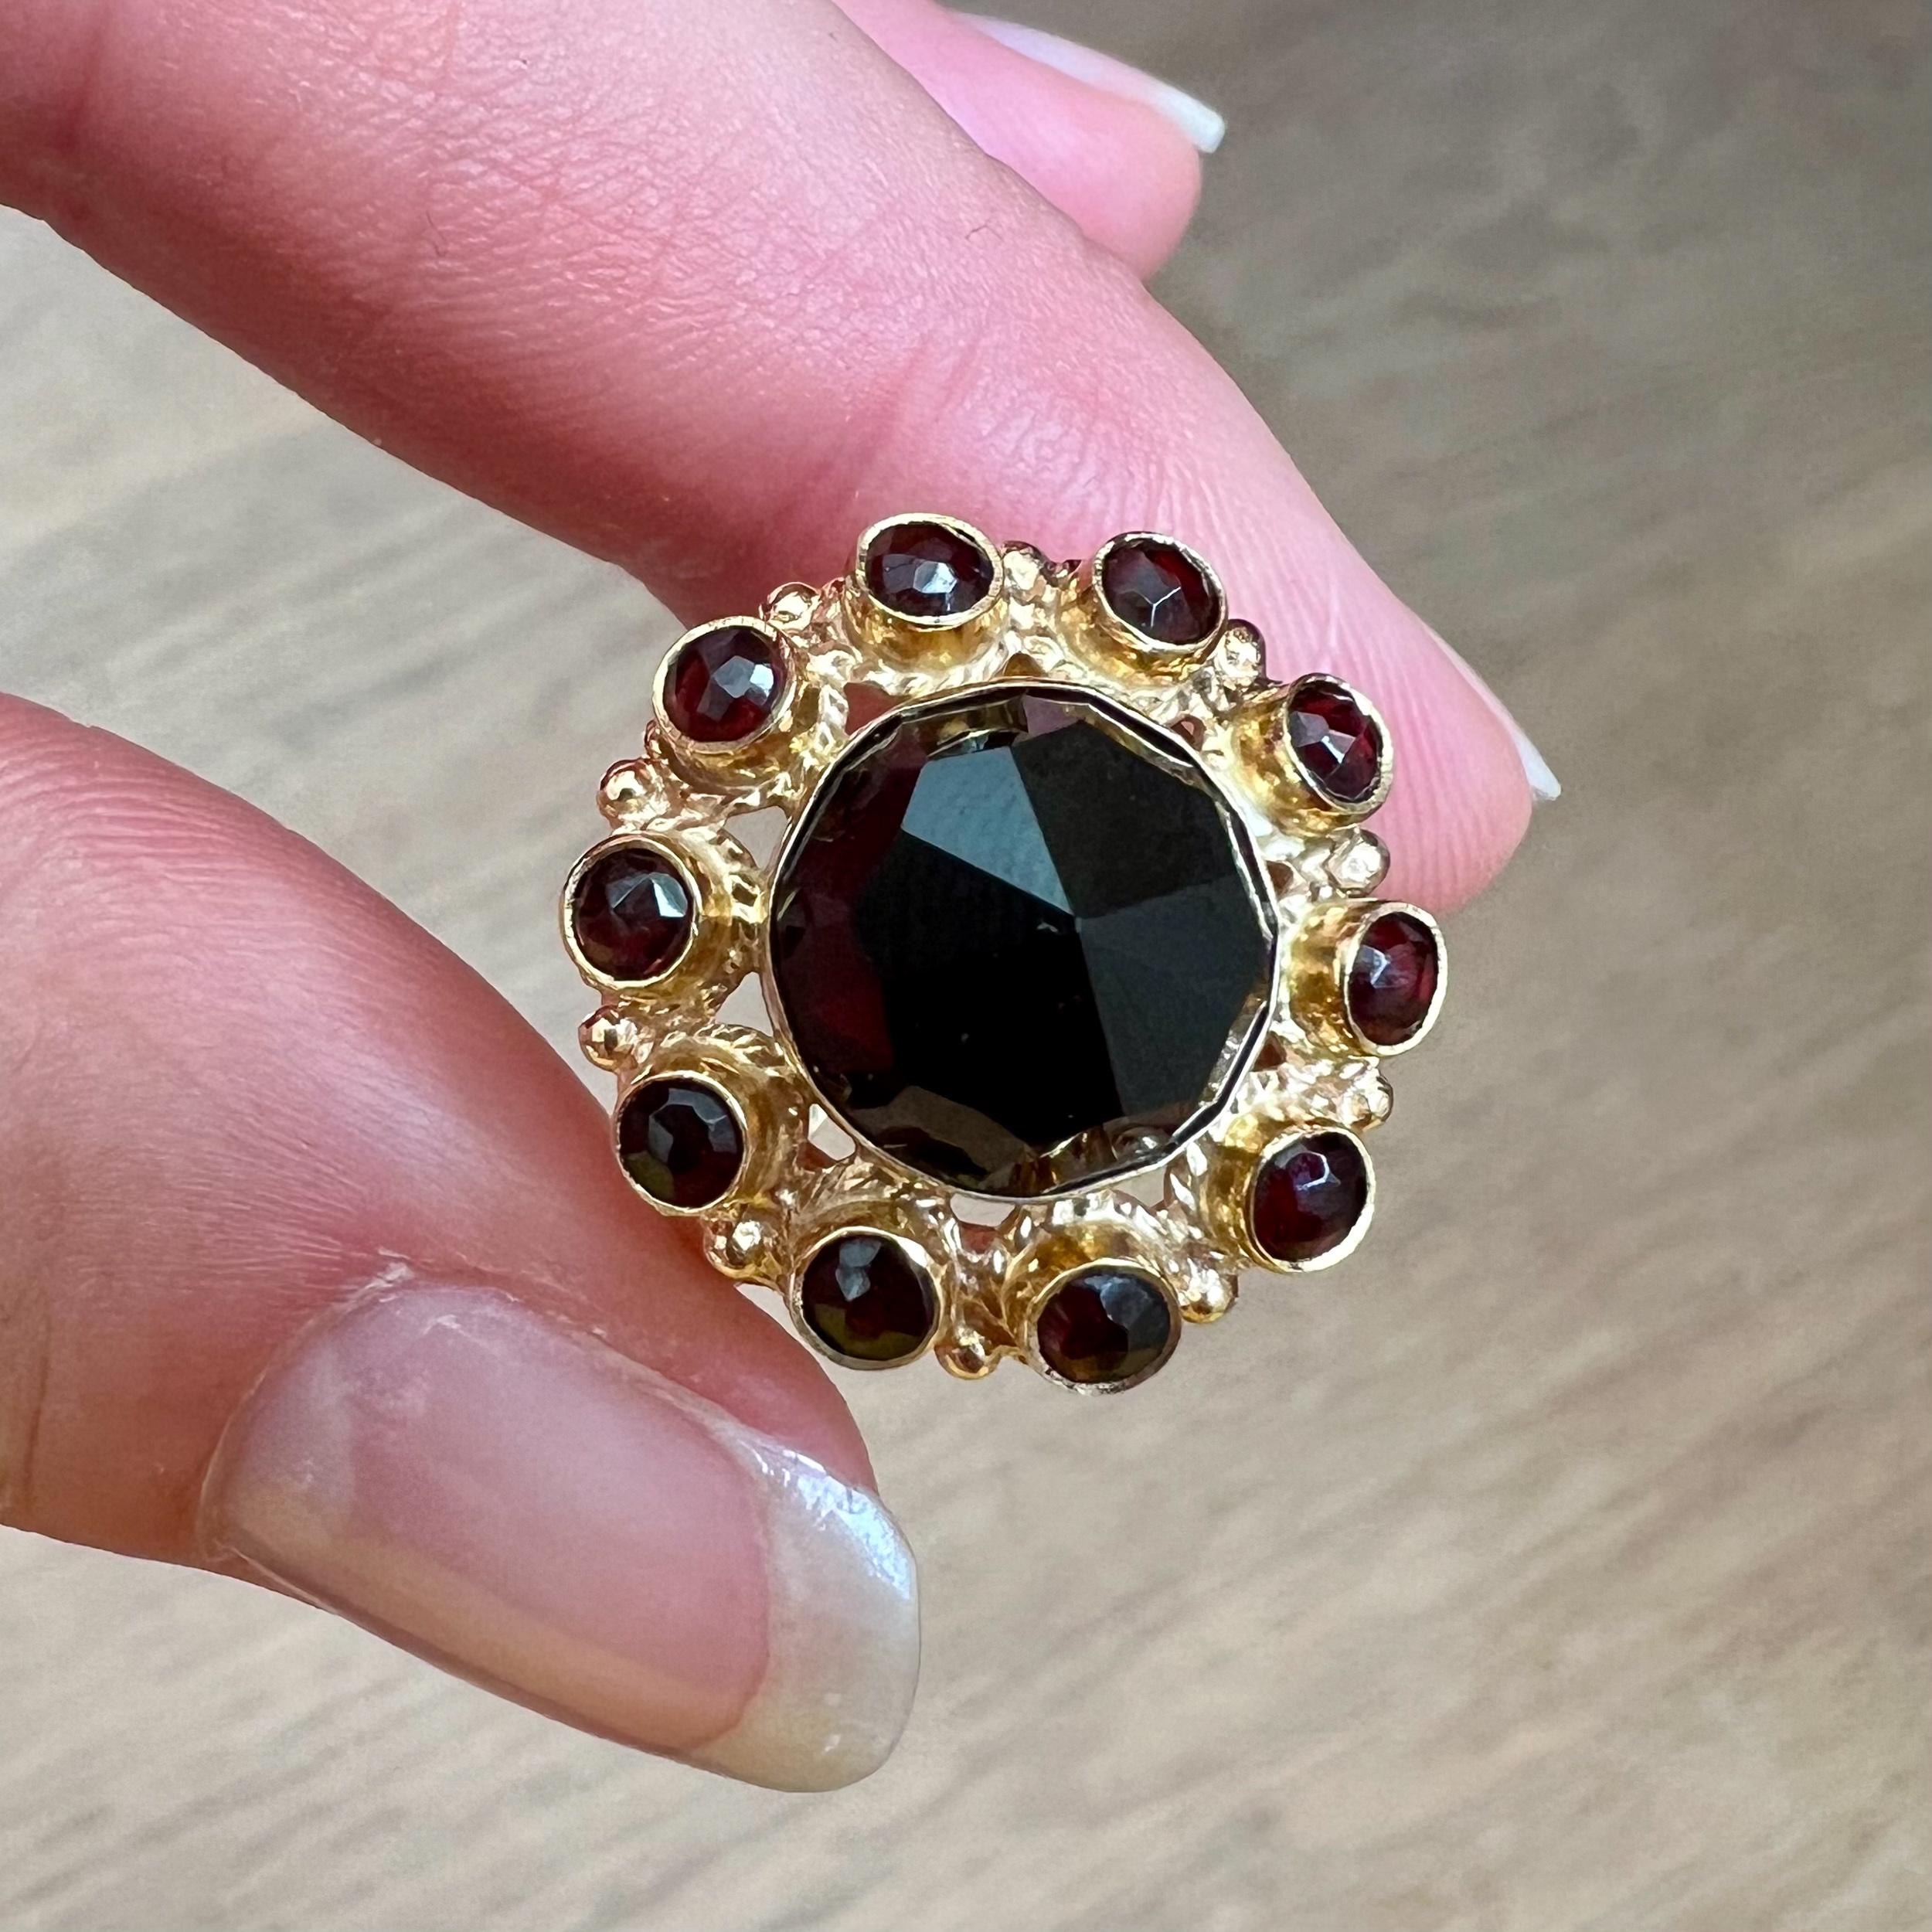 A vintage garnet cluster ring set in a 14 karat gold mounting. This gorgeous ring features a large round faceted garnet surrounded by ten smaller faceted garnets. The stones are bezel set and between the garnet stones the frame has an openwork